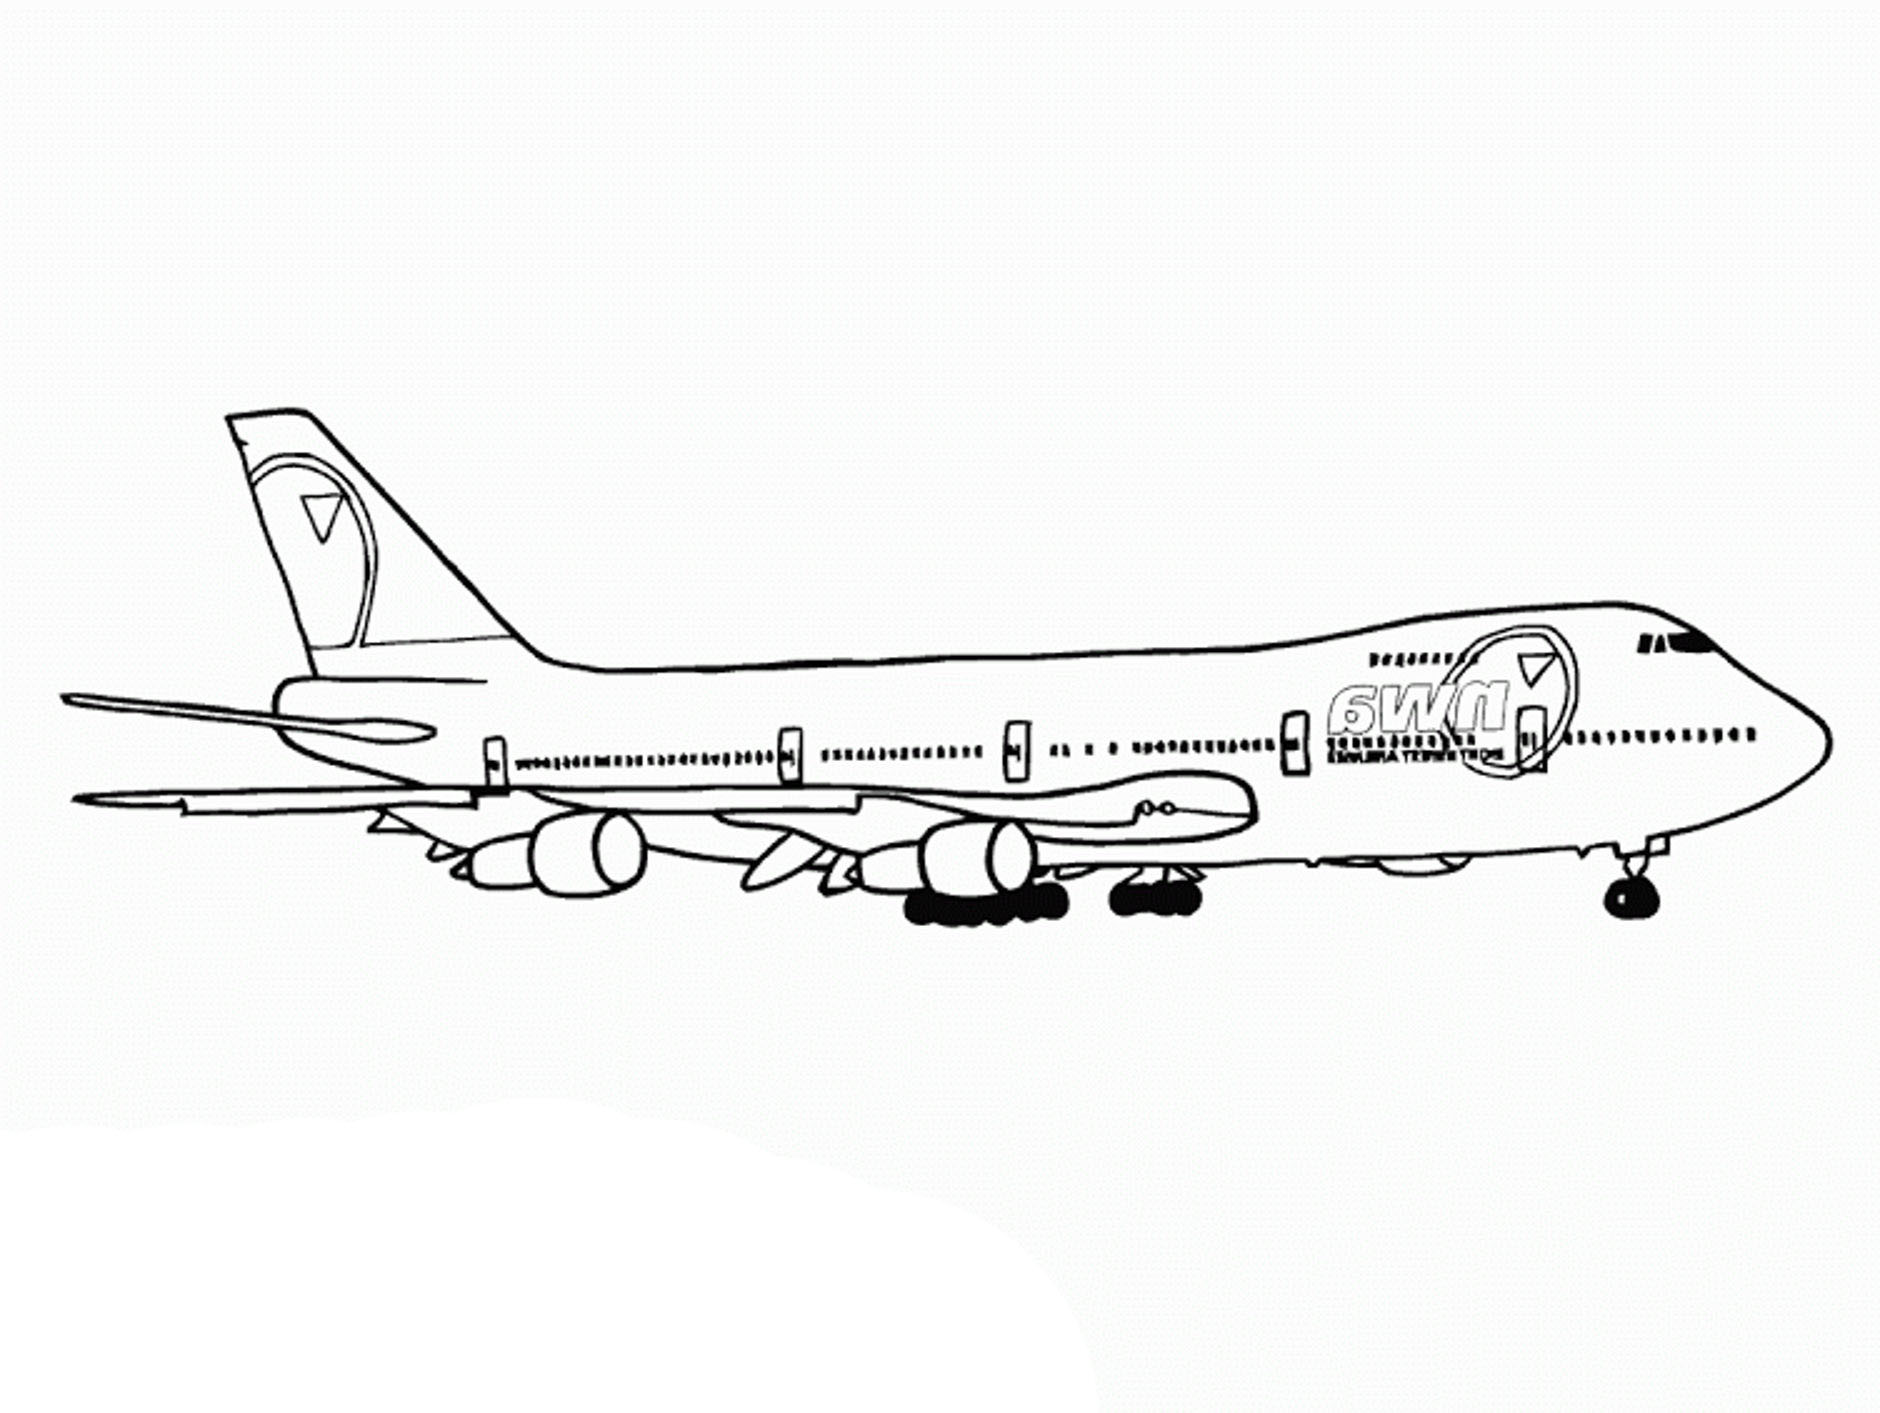 Print & Download - The Sophisticated Transportation of Airplane